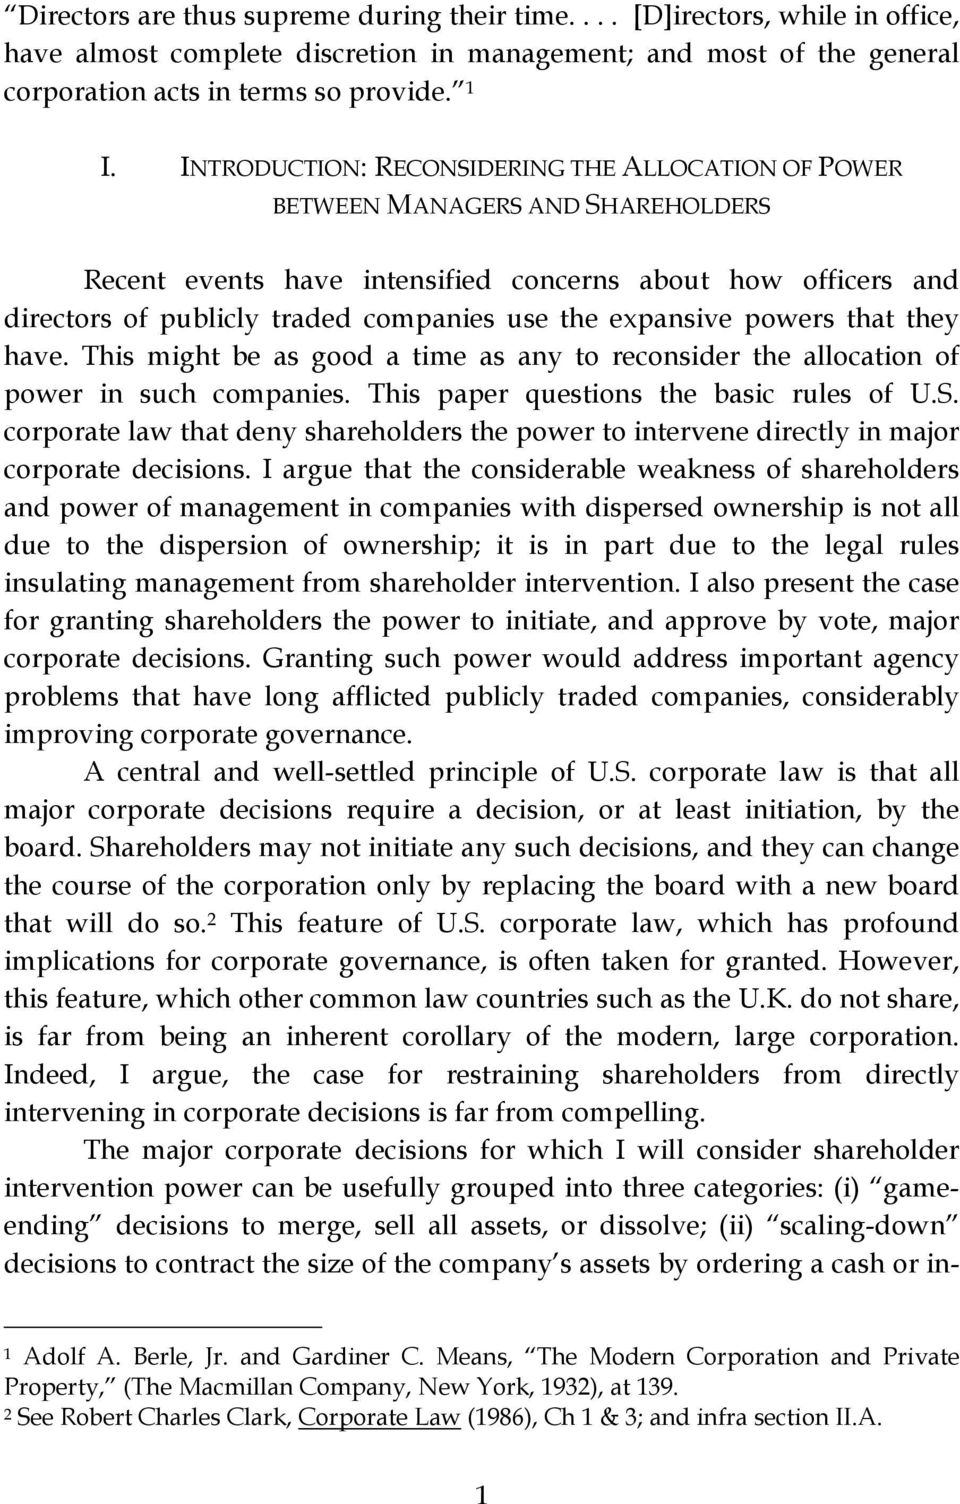 expansive powers that they have. This might be as good a time as any to reconsider the allocation of power in such companies. This paper questions the basic rules of U.S.